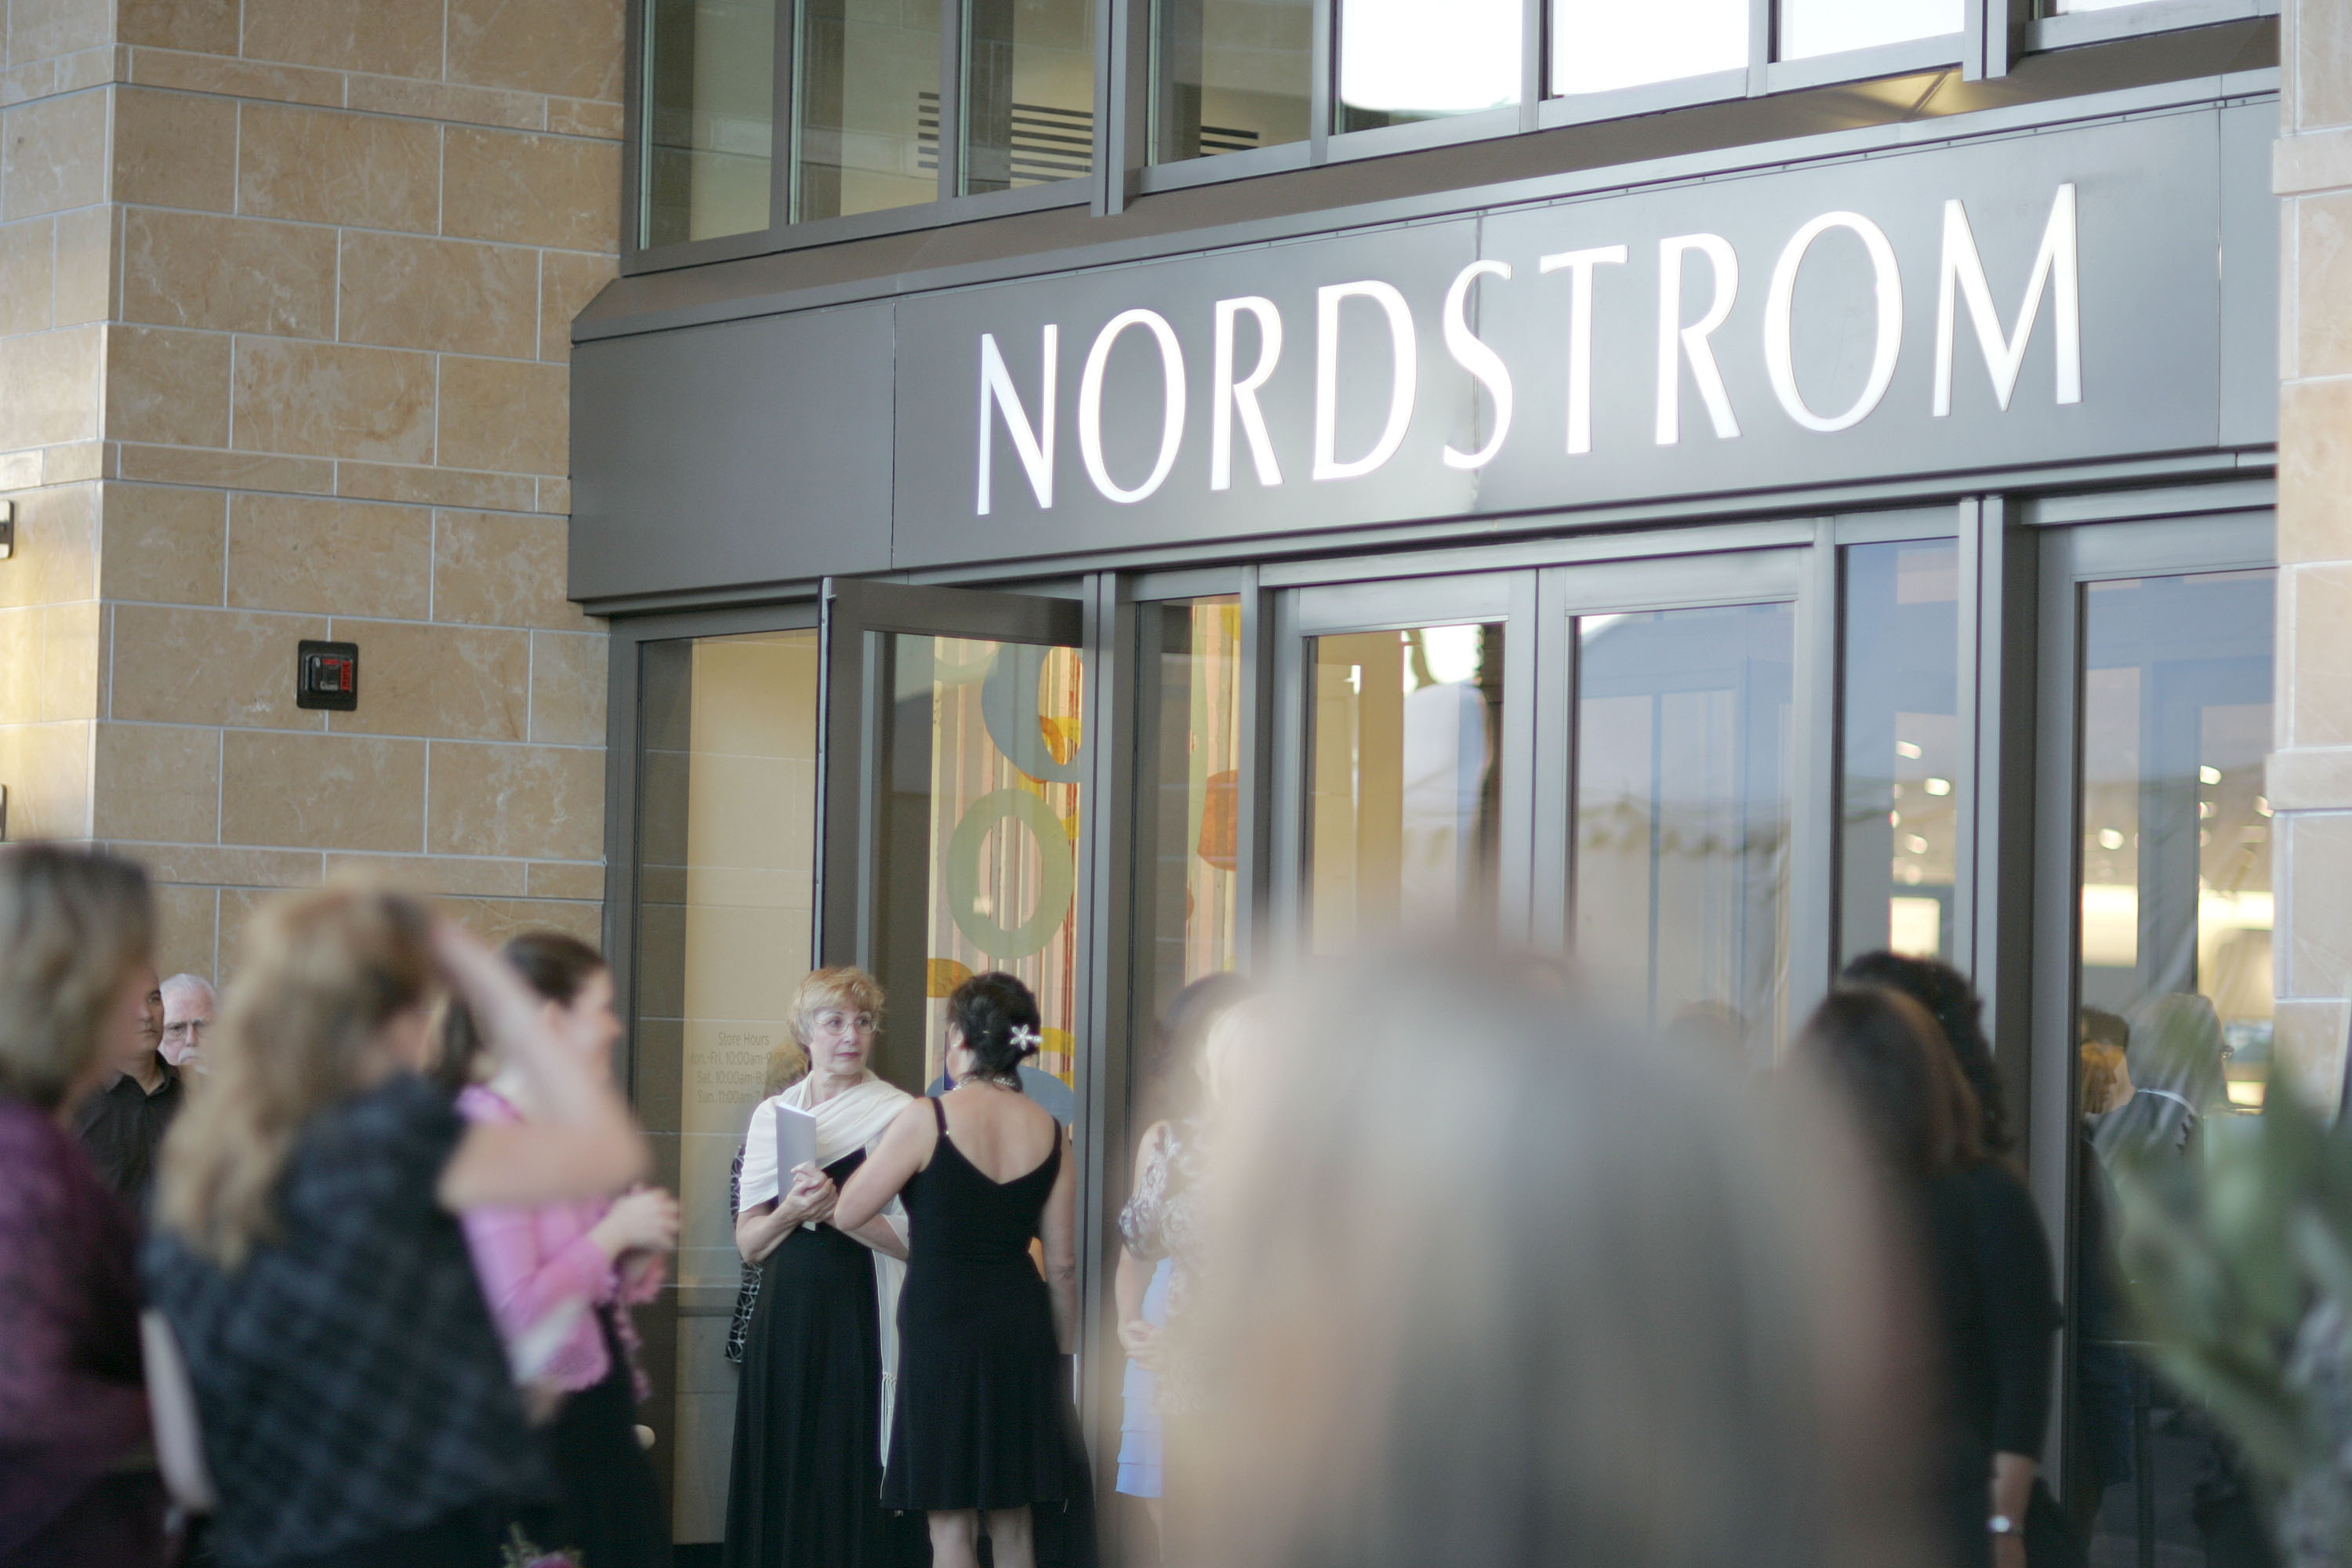 Timeline: California Stores Like Macy's, Nordstrom, Looted in Raids